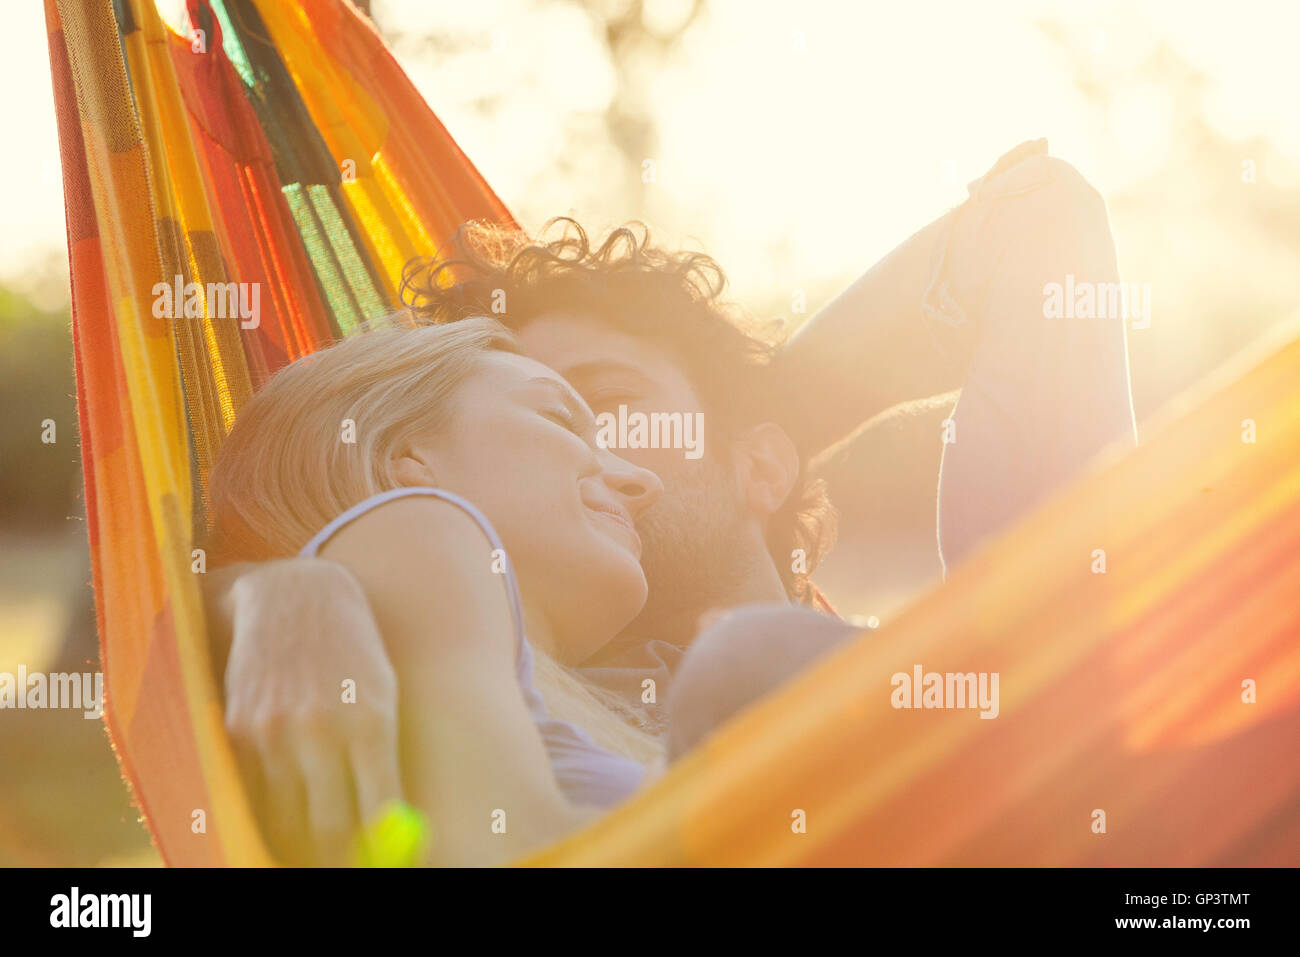 Couple napping together in hammock Stock Photo